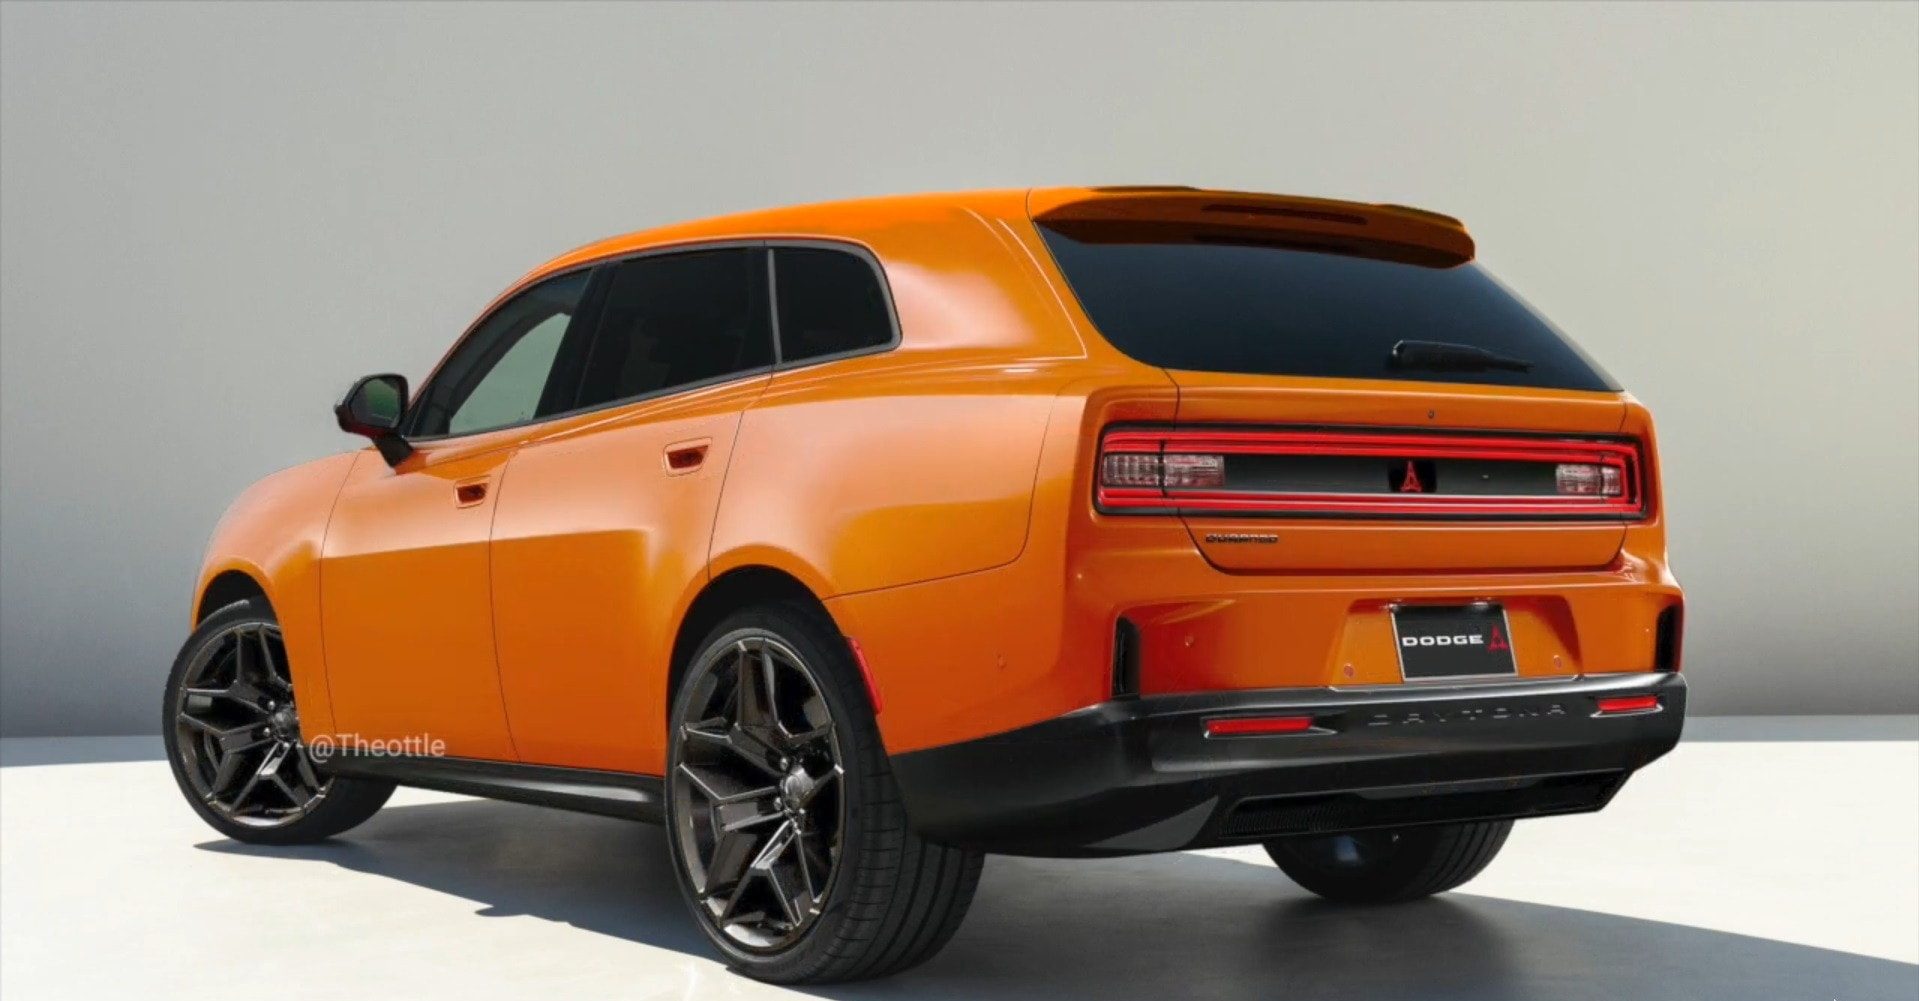 Dodge's Electric Muscle Charger and Durango's Future Ahead